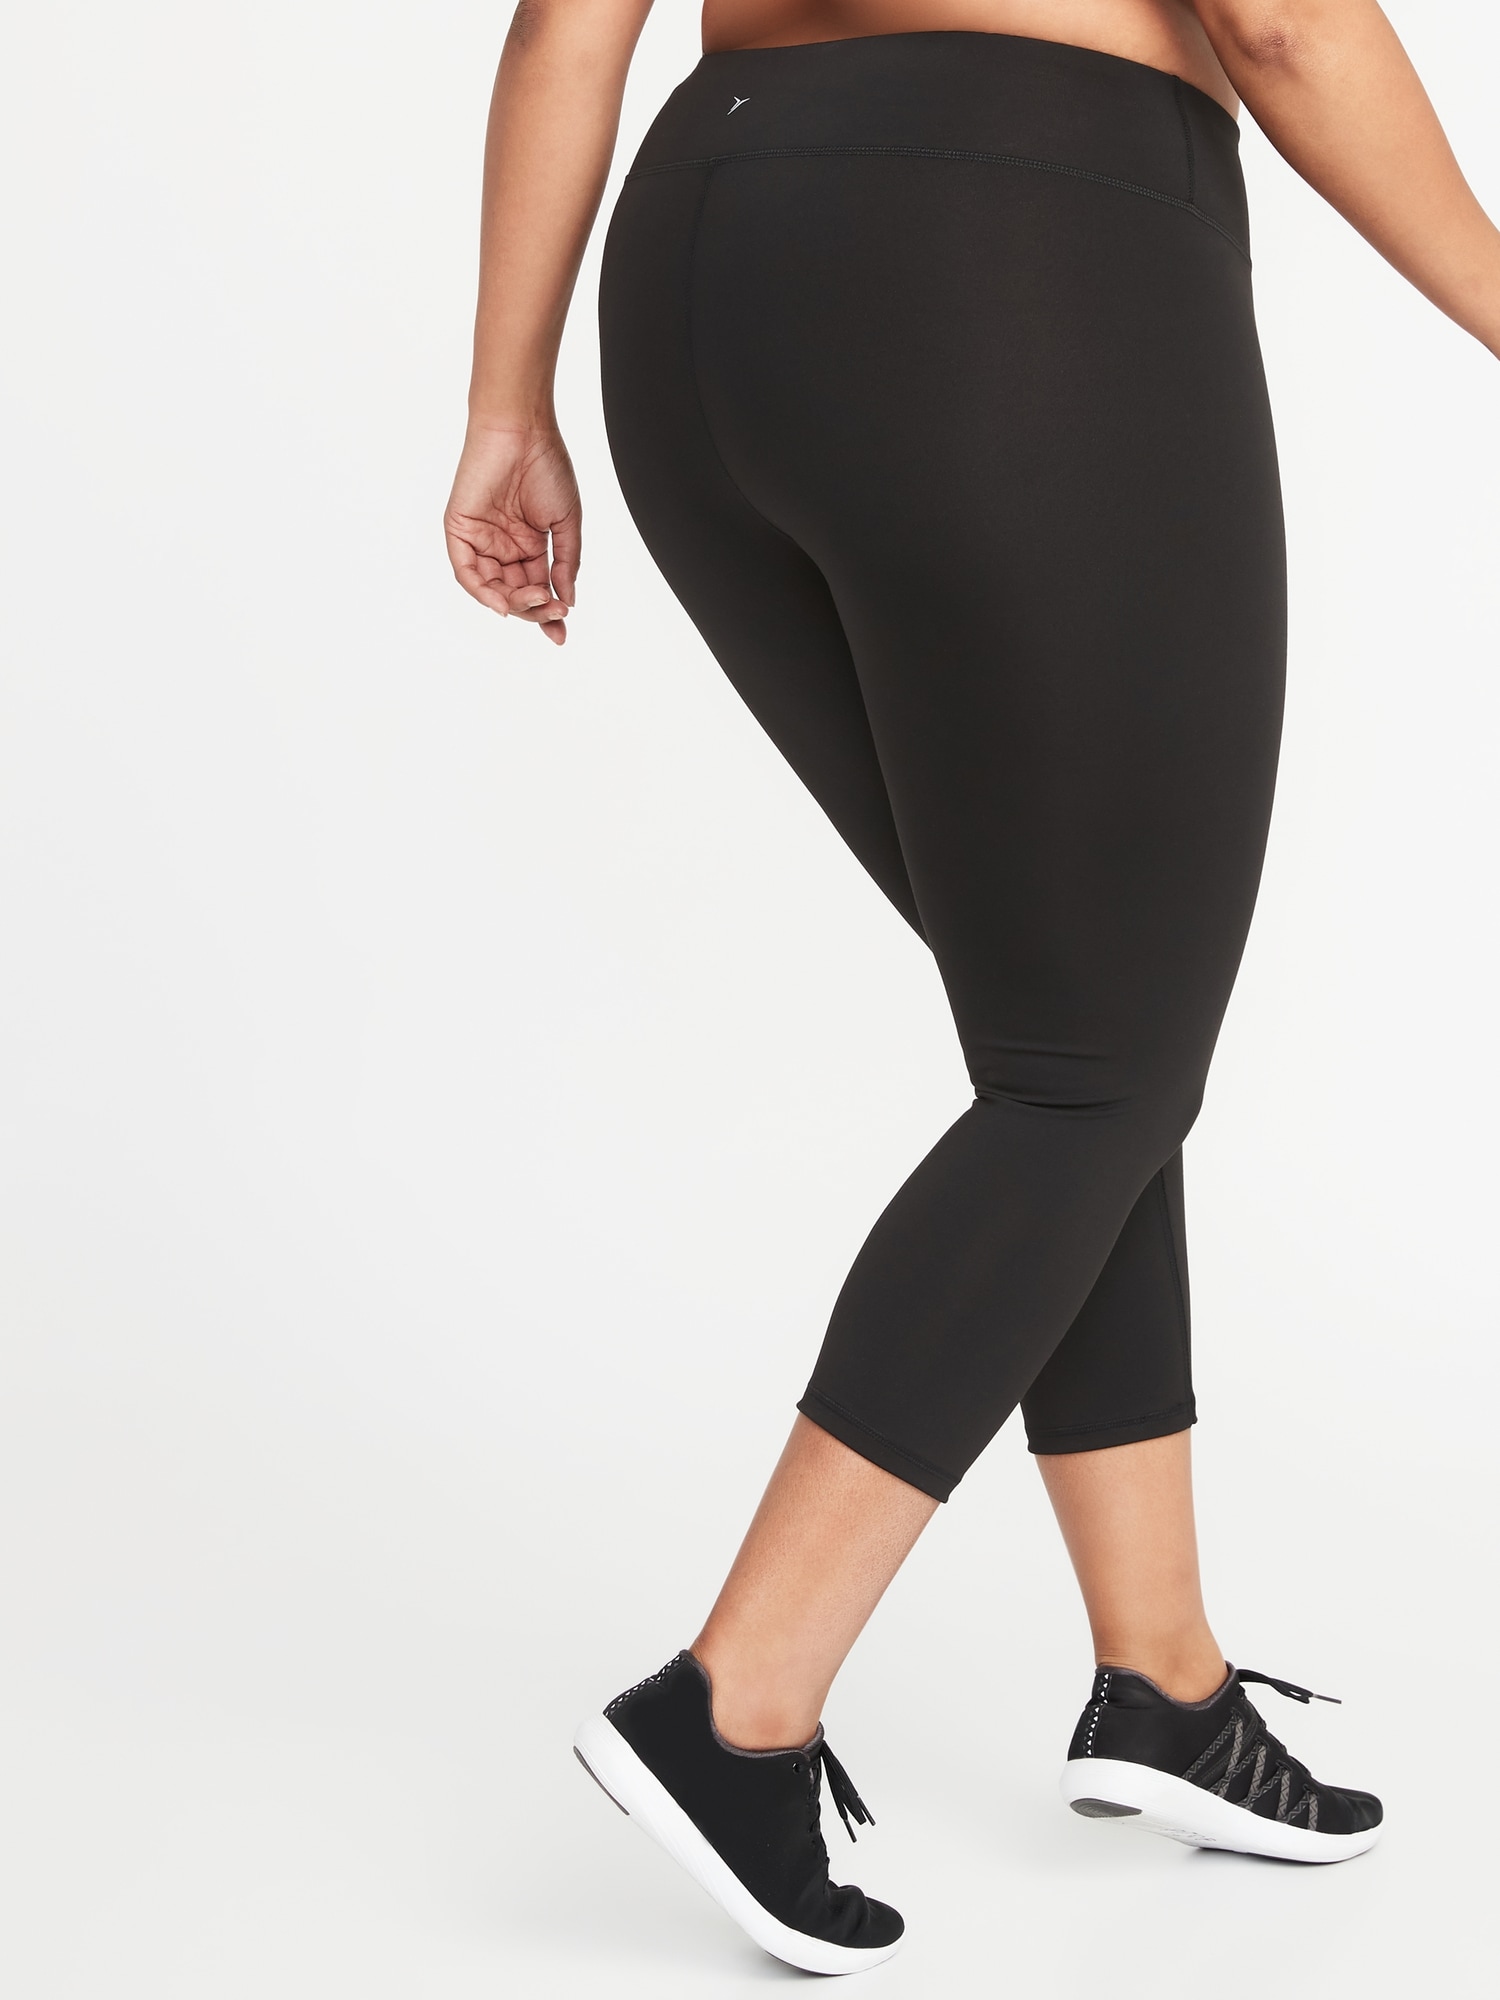 old navy plus size compression leggings